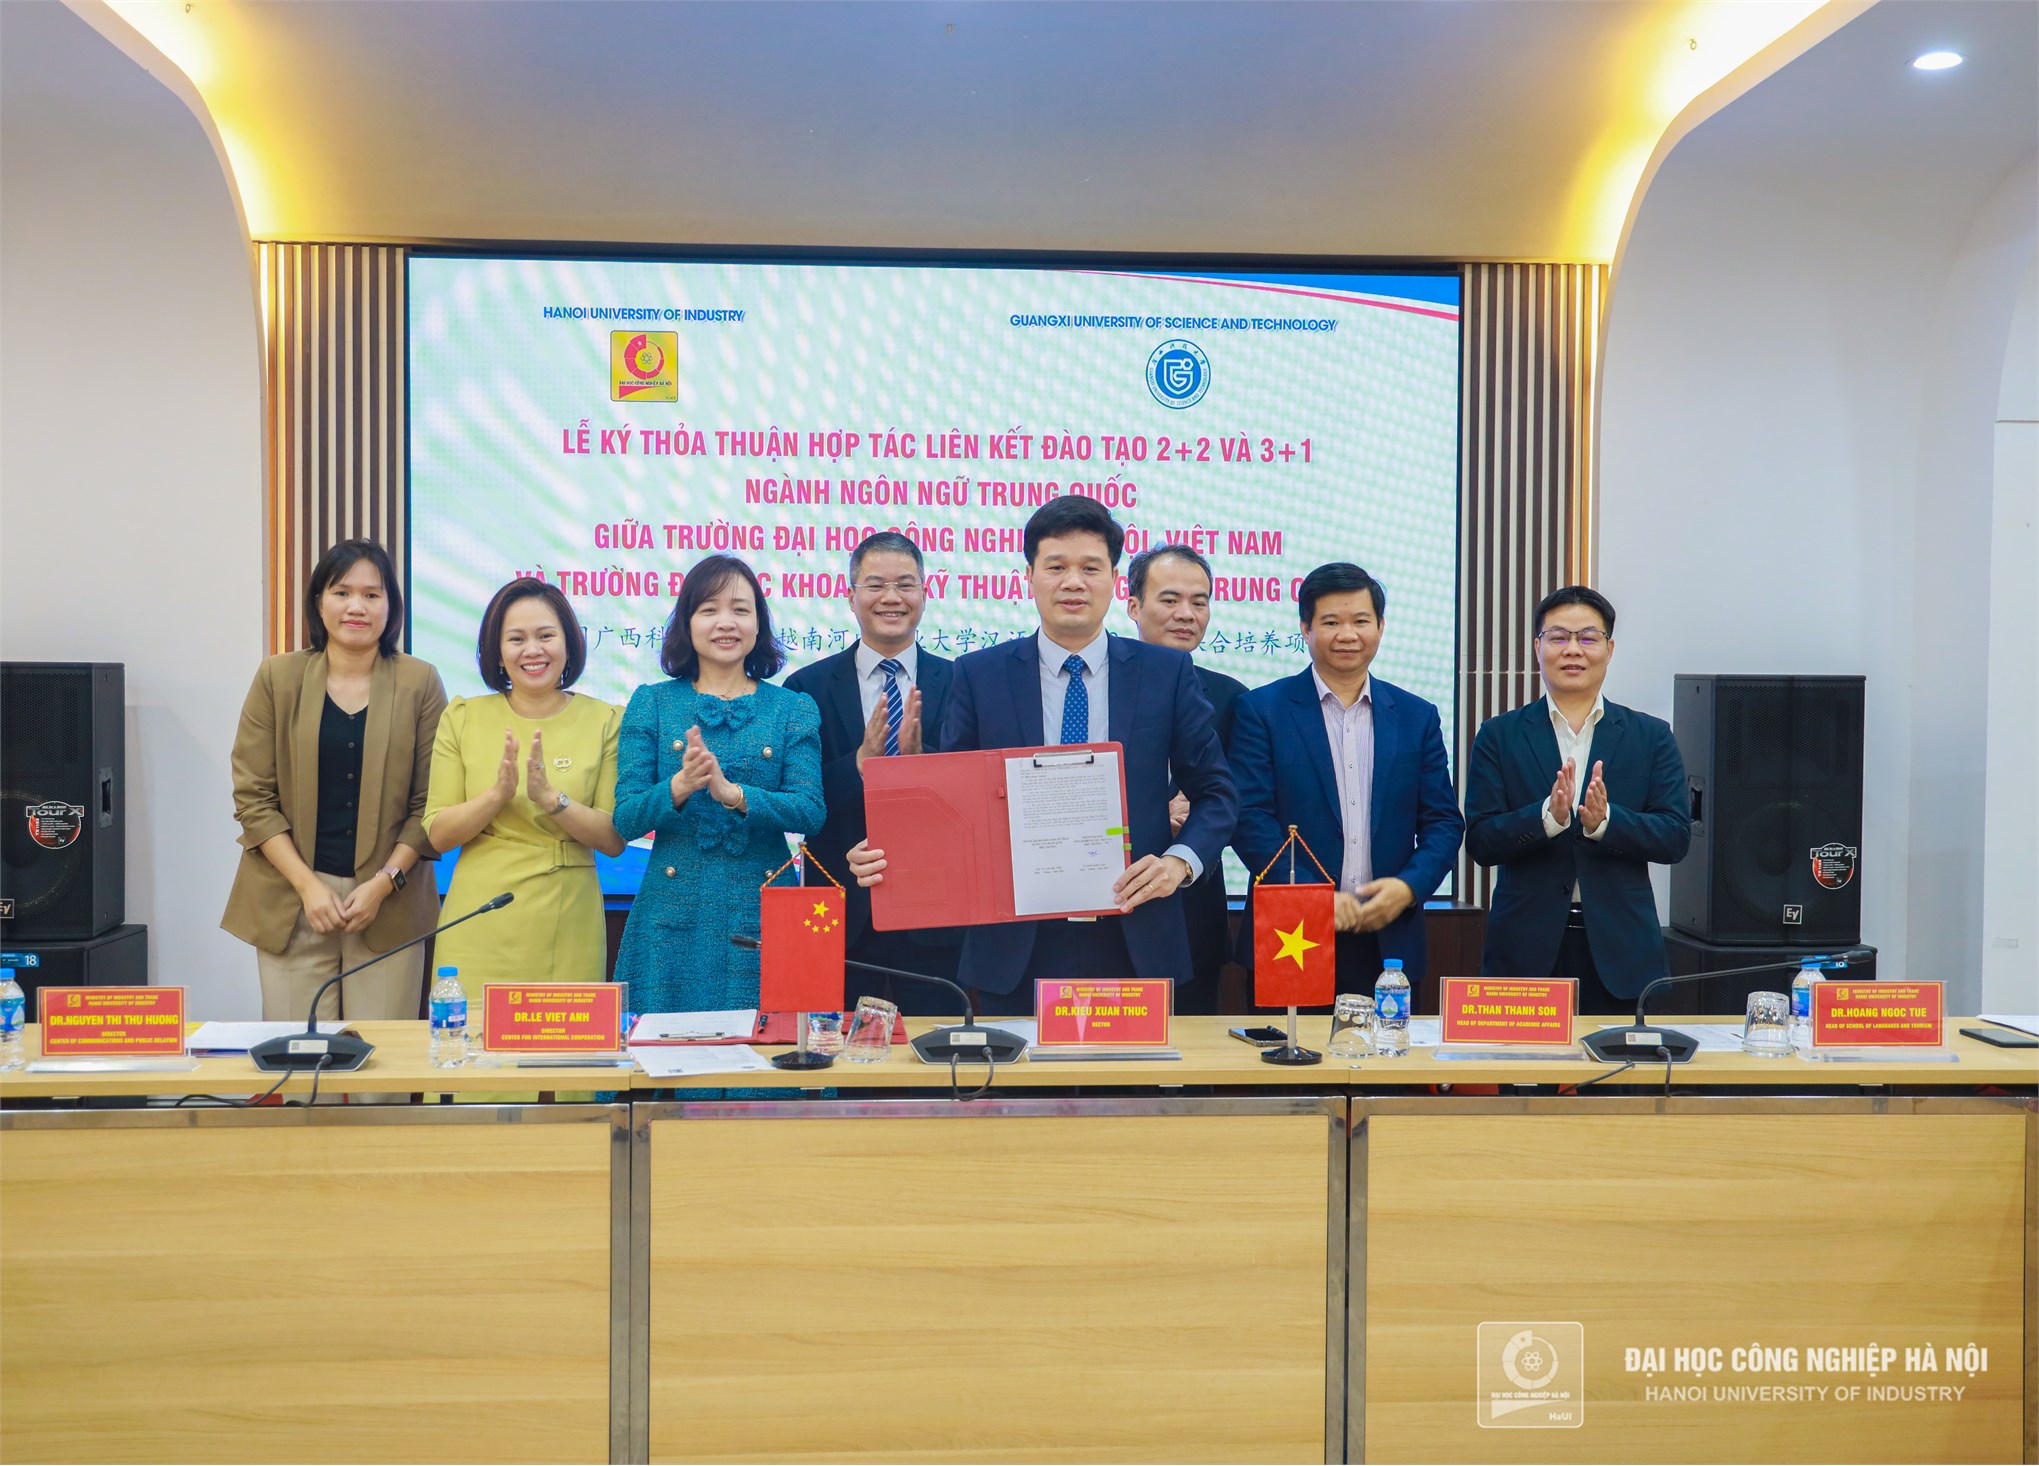 Hanoi University of Industry and Guangxi University of Science and Technology, China signed a cooperation agreement on training